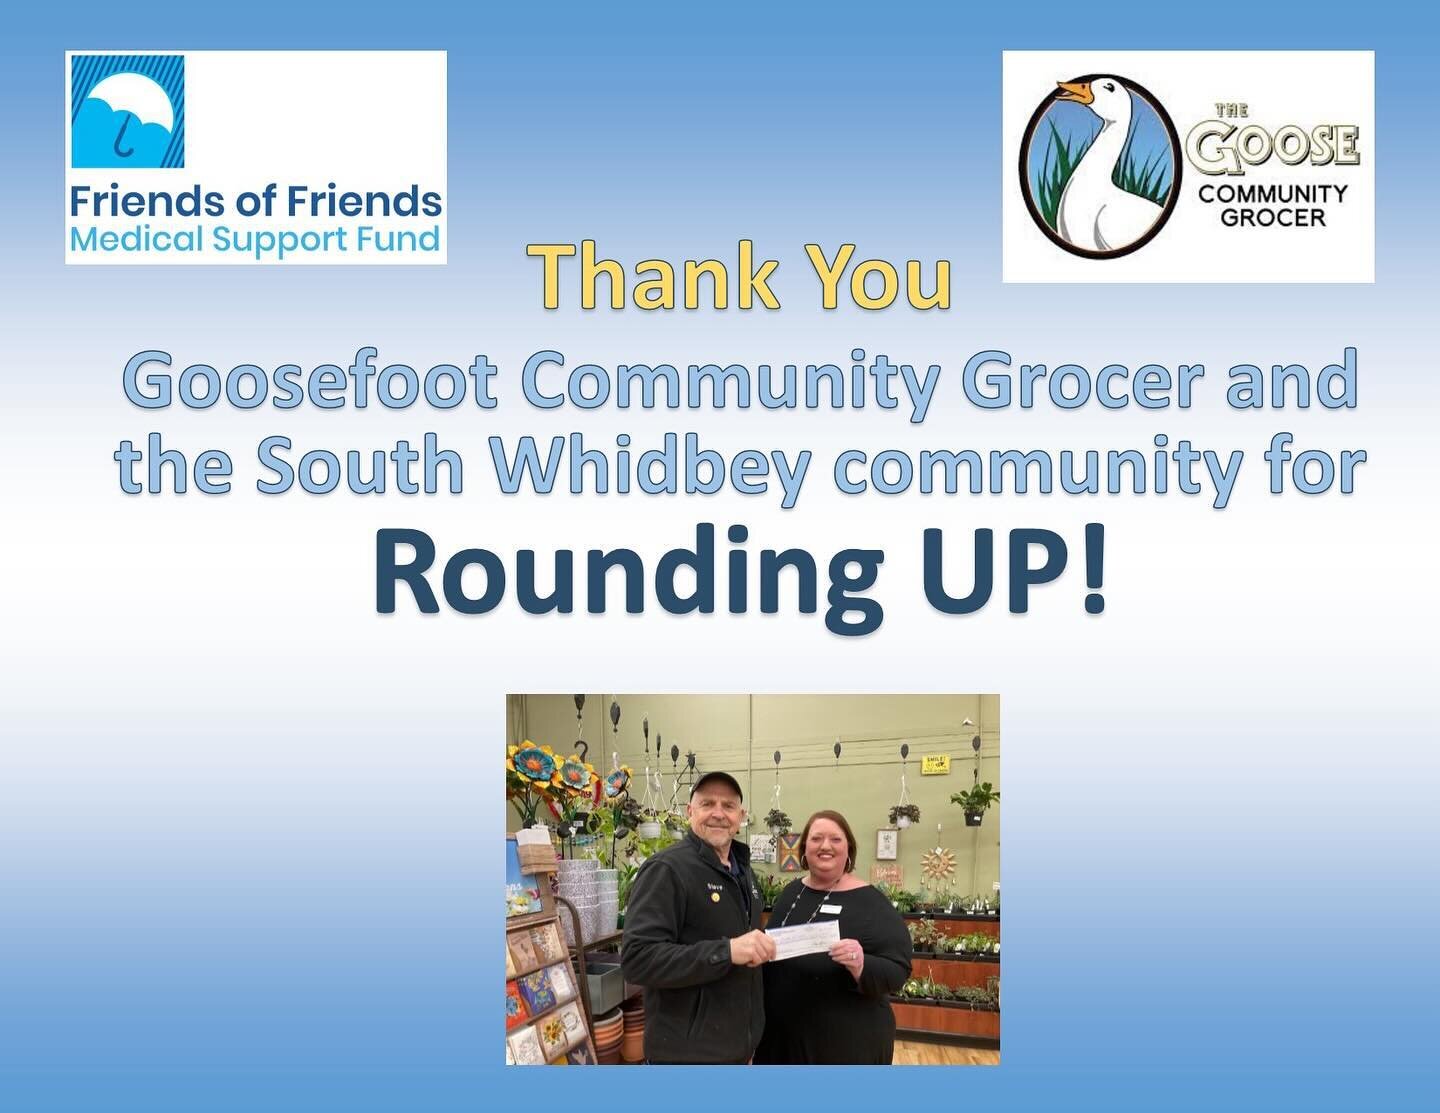 Thanks Goosefoot and the whole community for rounding up your grocery bill! We appreciate you!
Shown is Kristi Price, President of Friends of Friends and Steve Lamb, past Mr South Whidbey candidate.